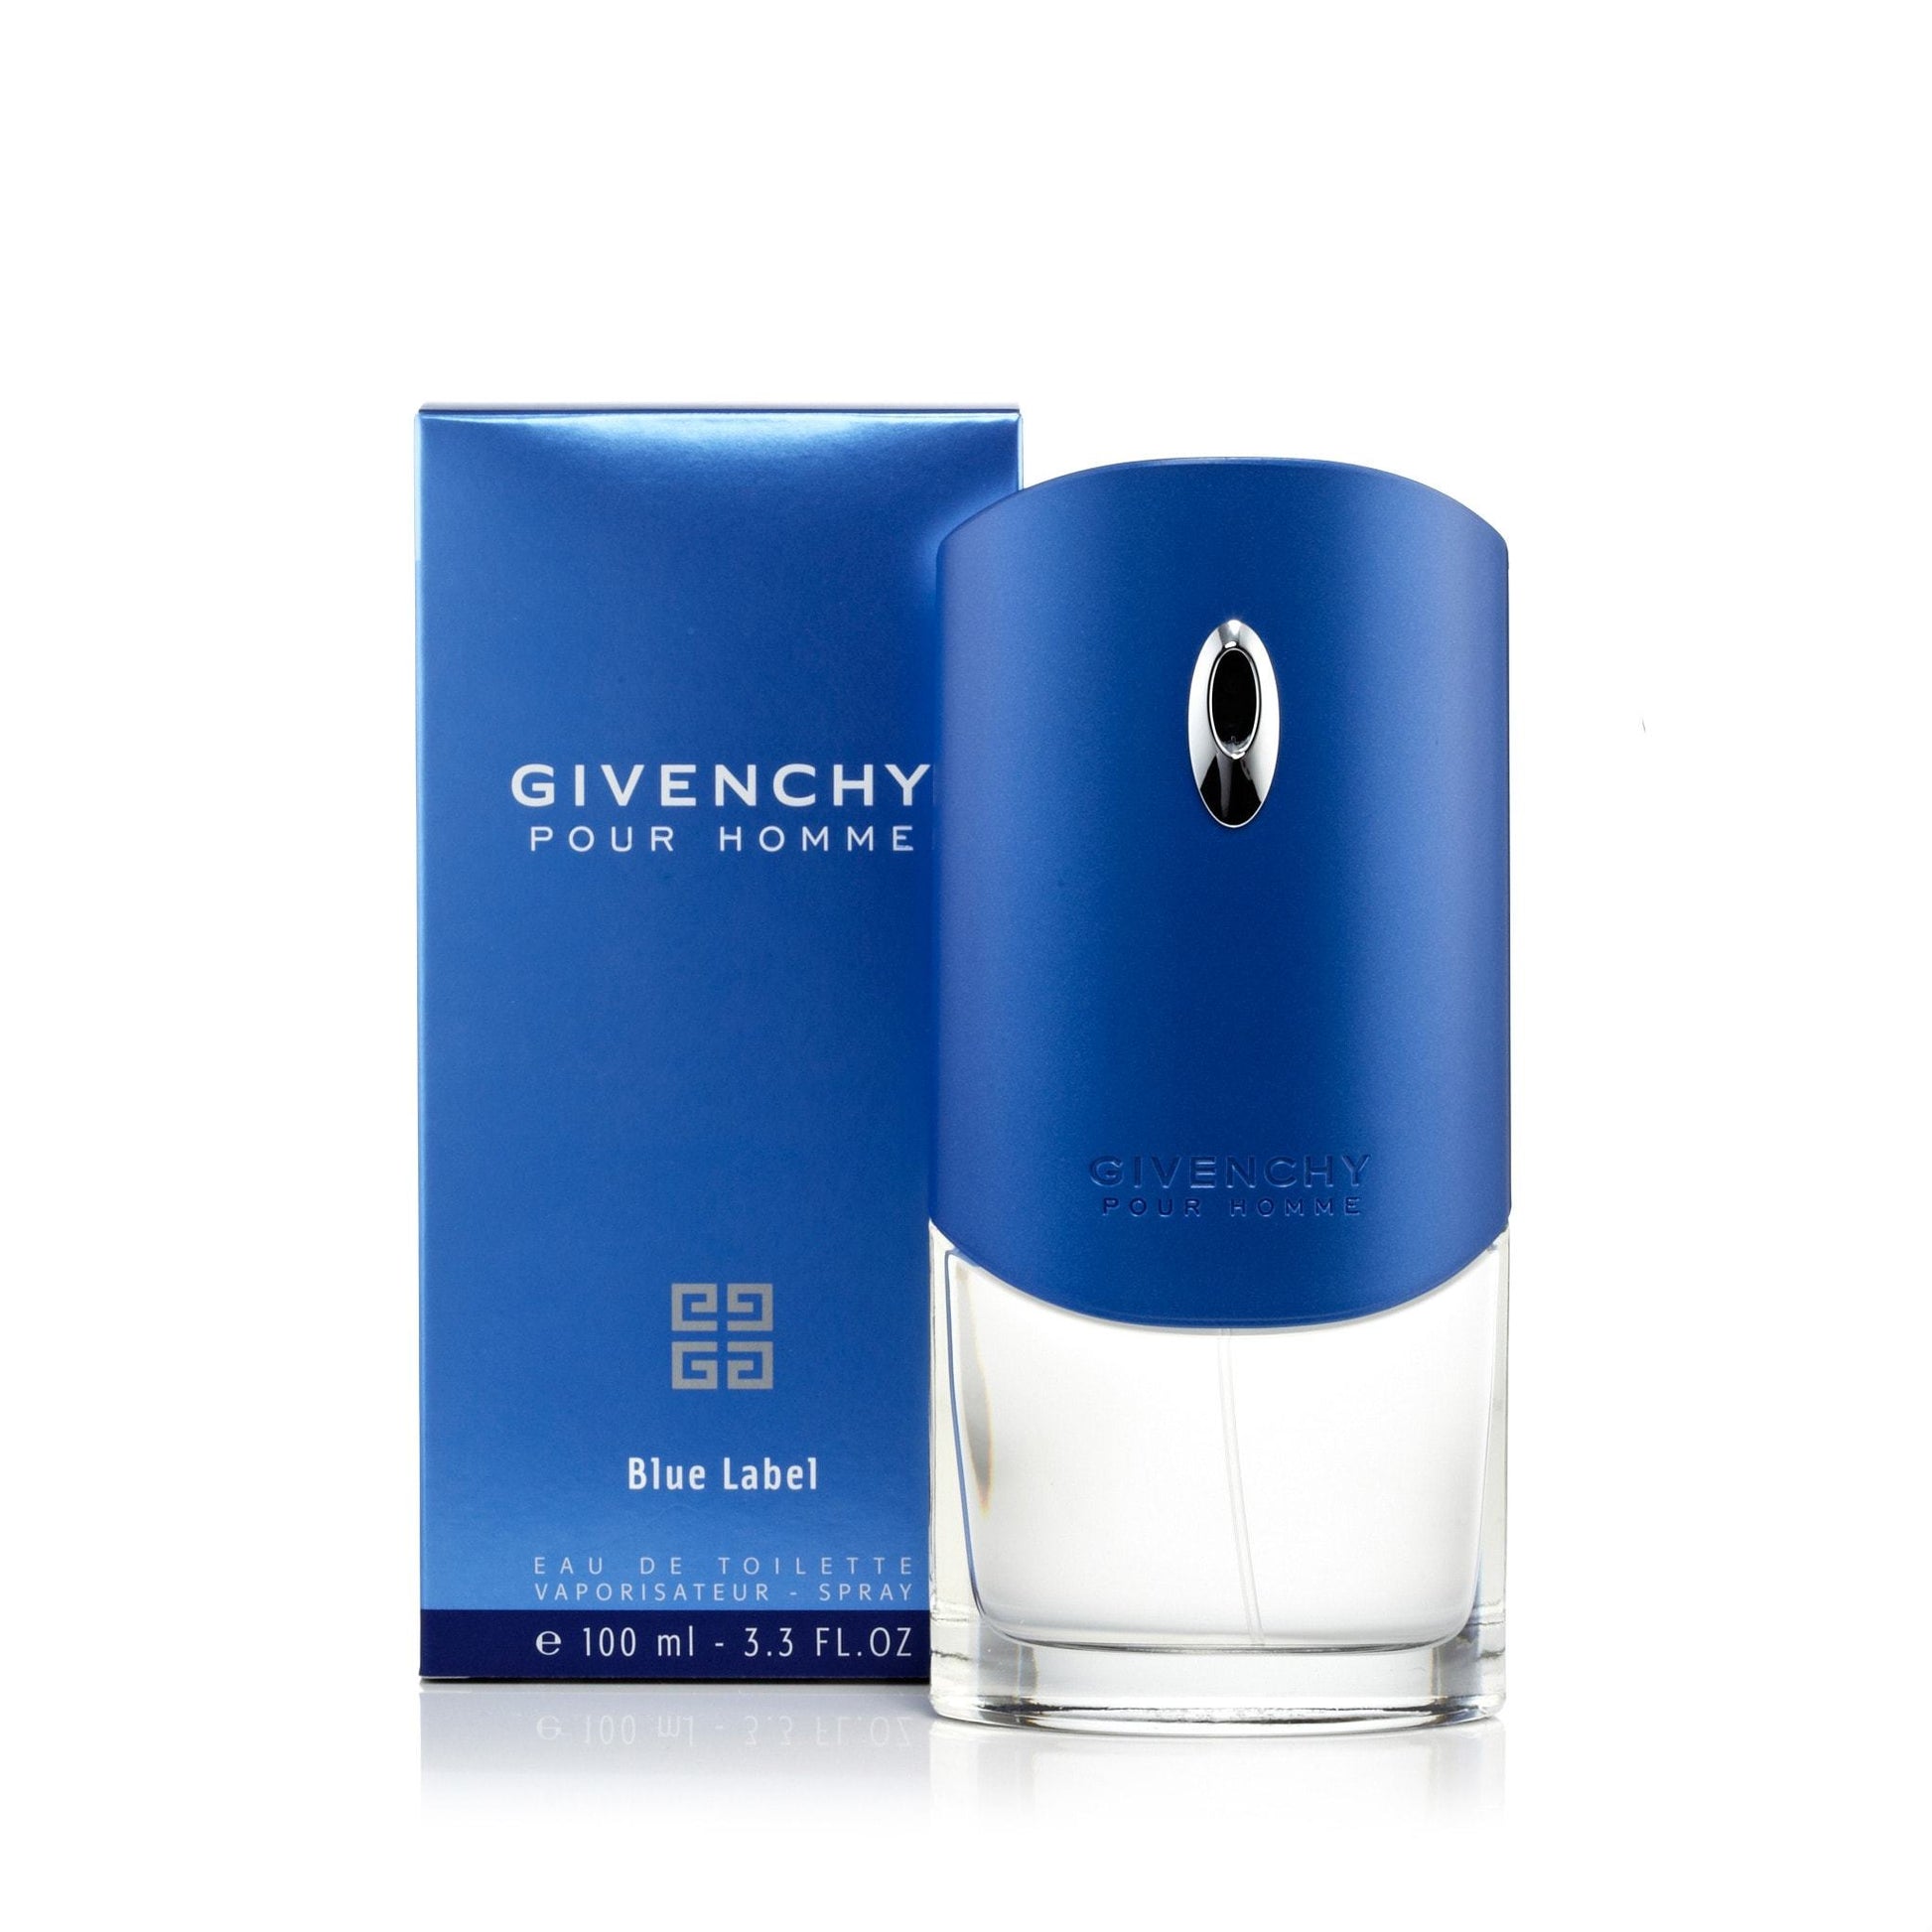 Givenchy pour homme 100. Givenchy Blue Label 100ml. Духи мужские Givenchy Blue Label. Givenchy pour homme Blue Label 100ml. Givenchy pour homme 100ml мужские.